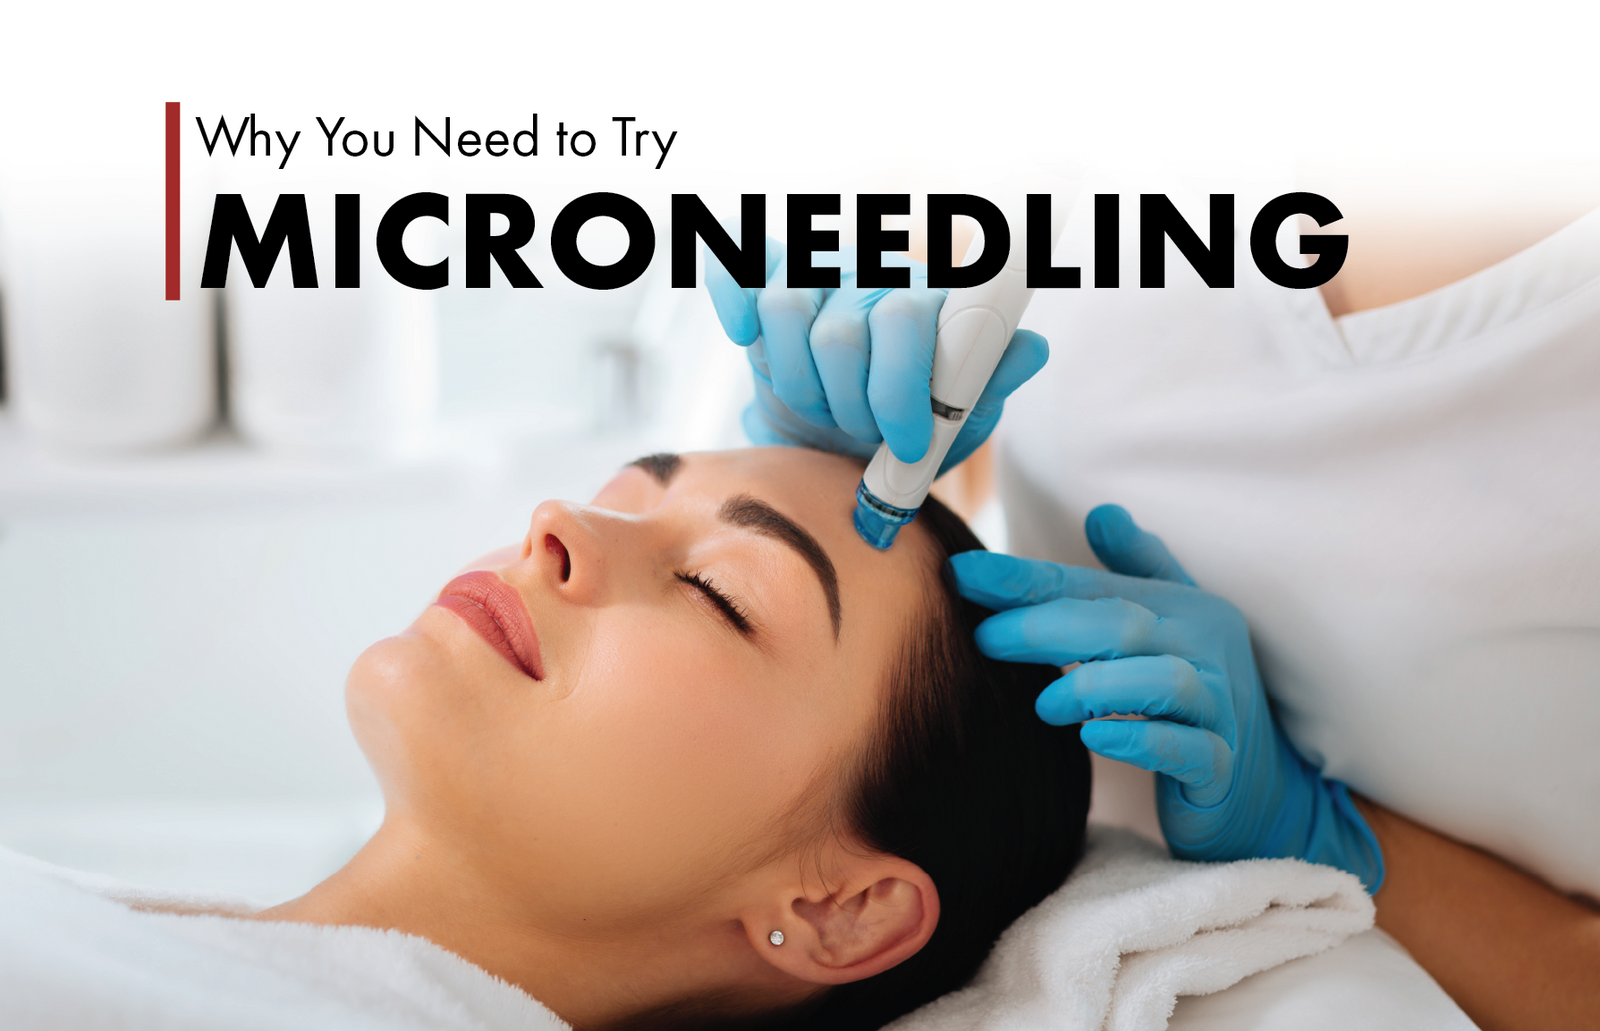 Microneedling with the DermaPen